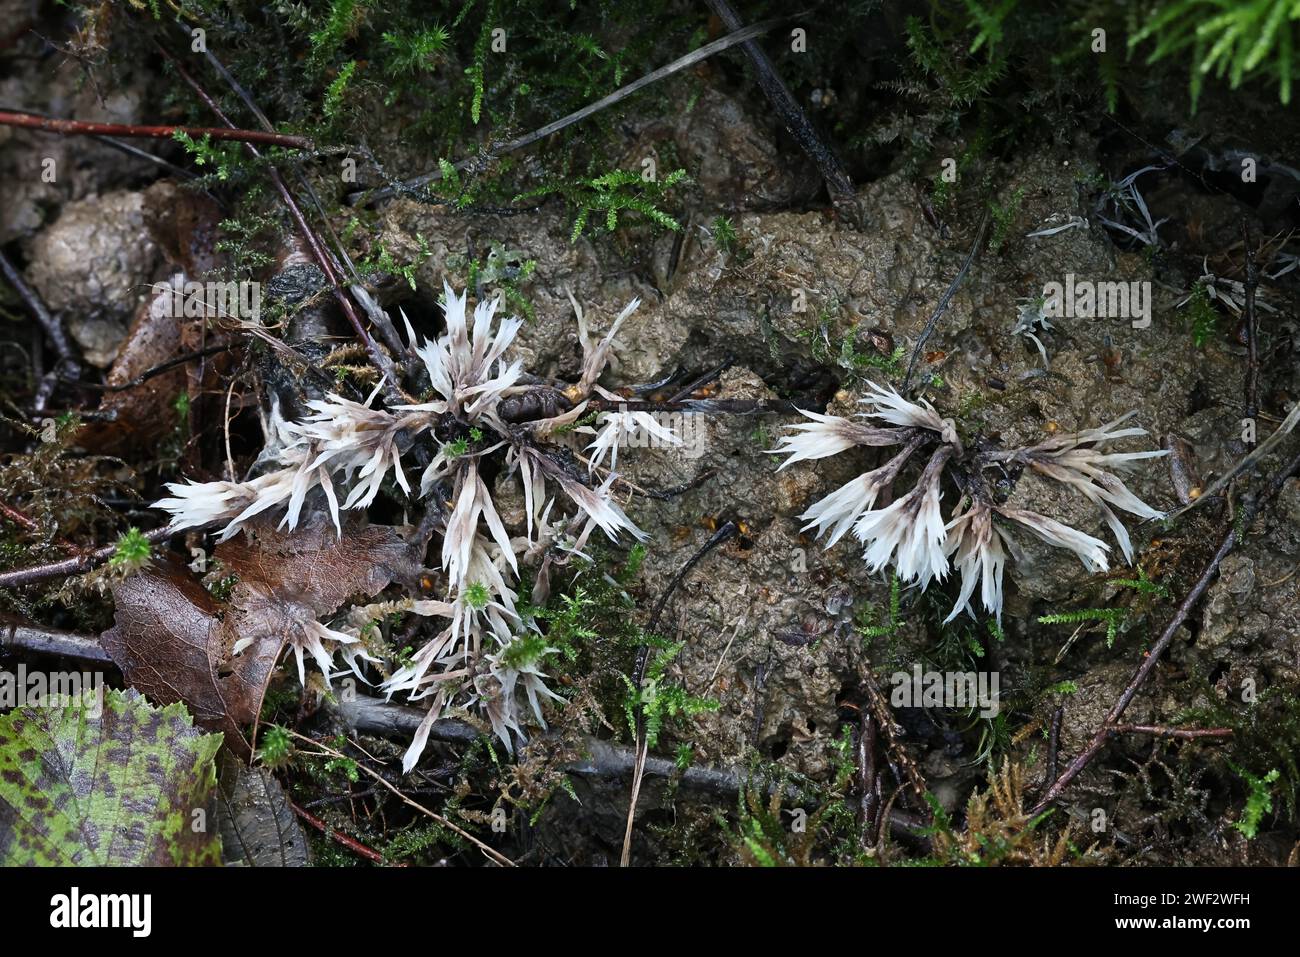 Thelephora penicillata, also called Phylacteria mollissima, commonly known as Urchin earthfan, wild fungus from Finland Stock Photo